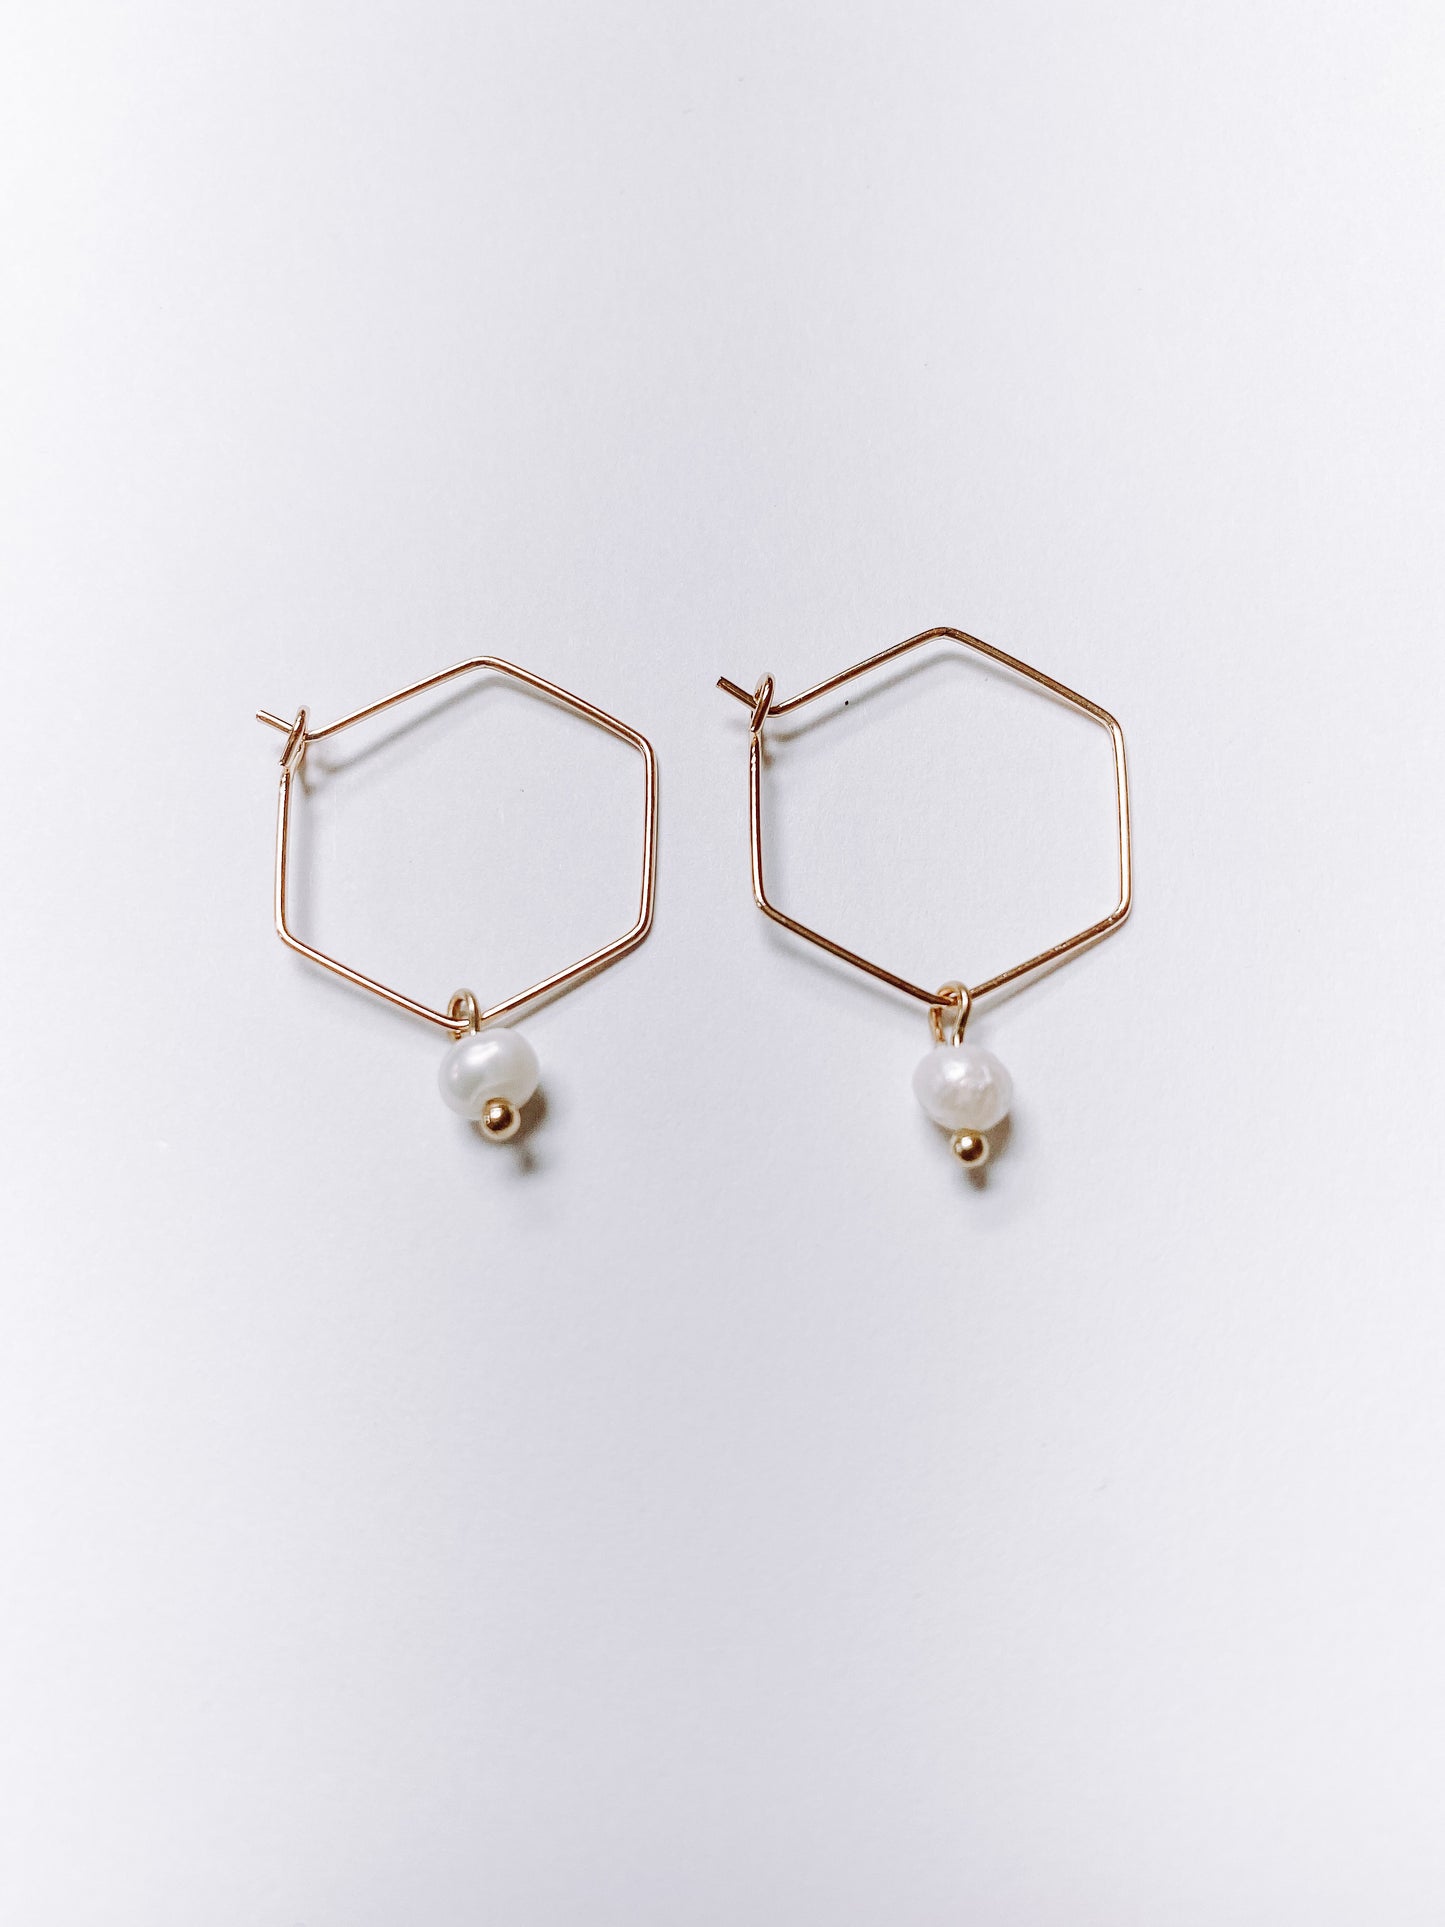 Gold Hexagonal Hoops with Pearl